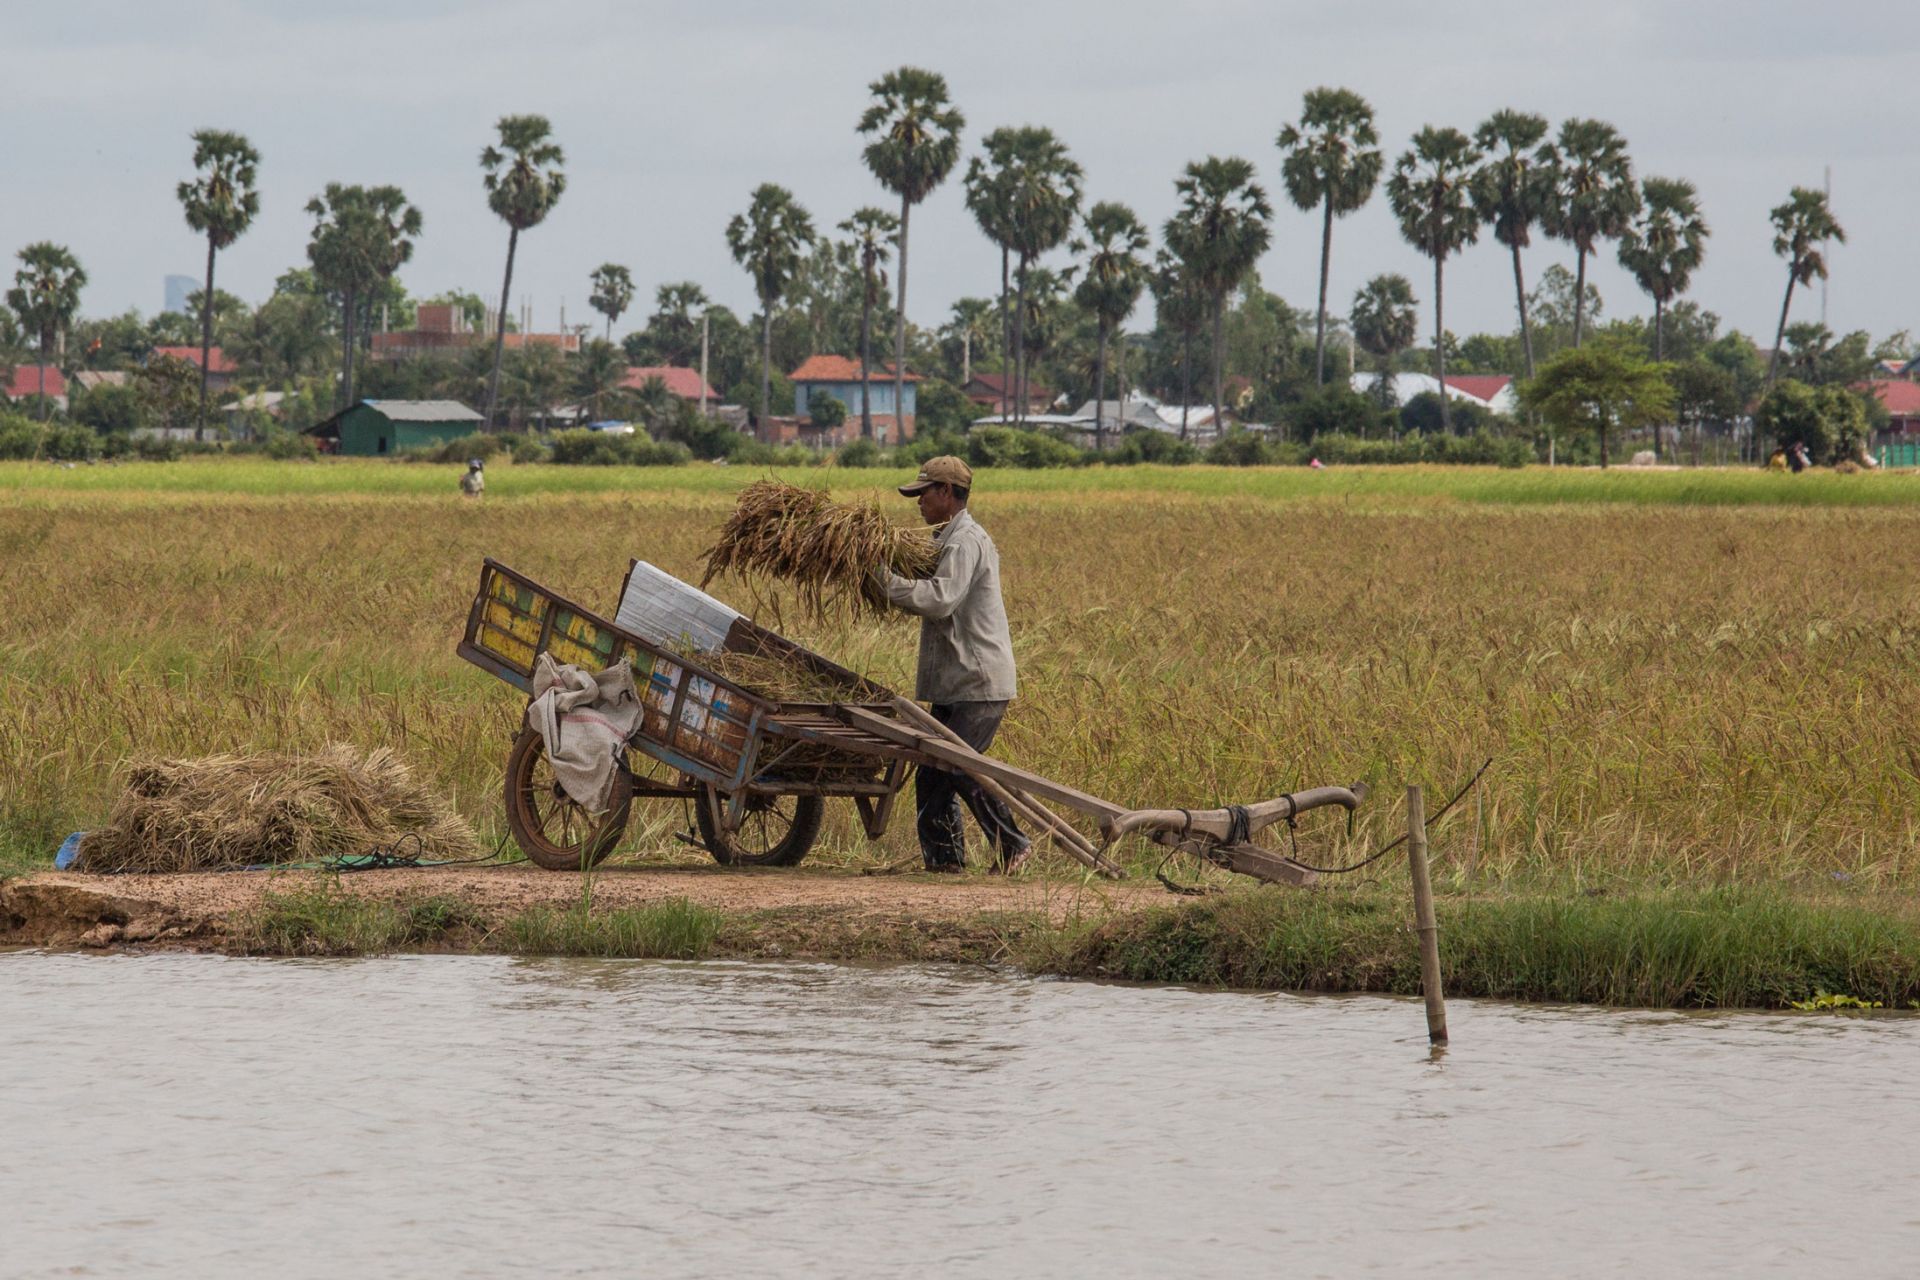 Long shot of a man in a field carrying a bale of rice to put in a wooden cart.